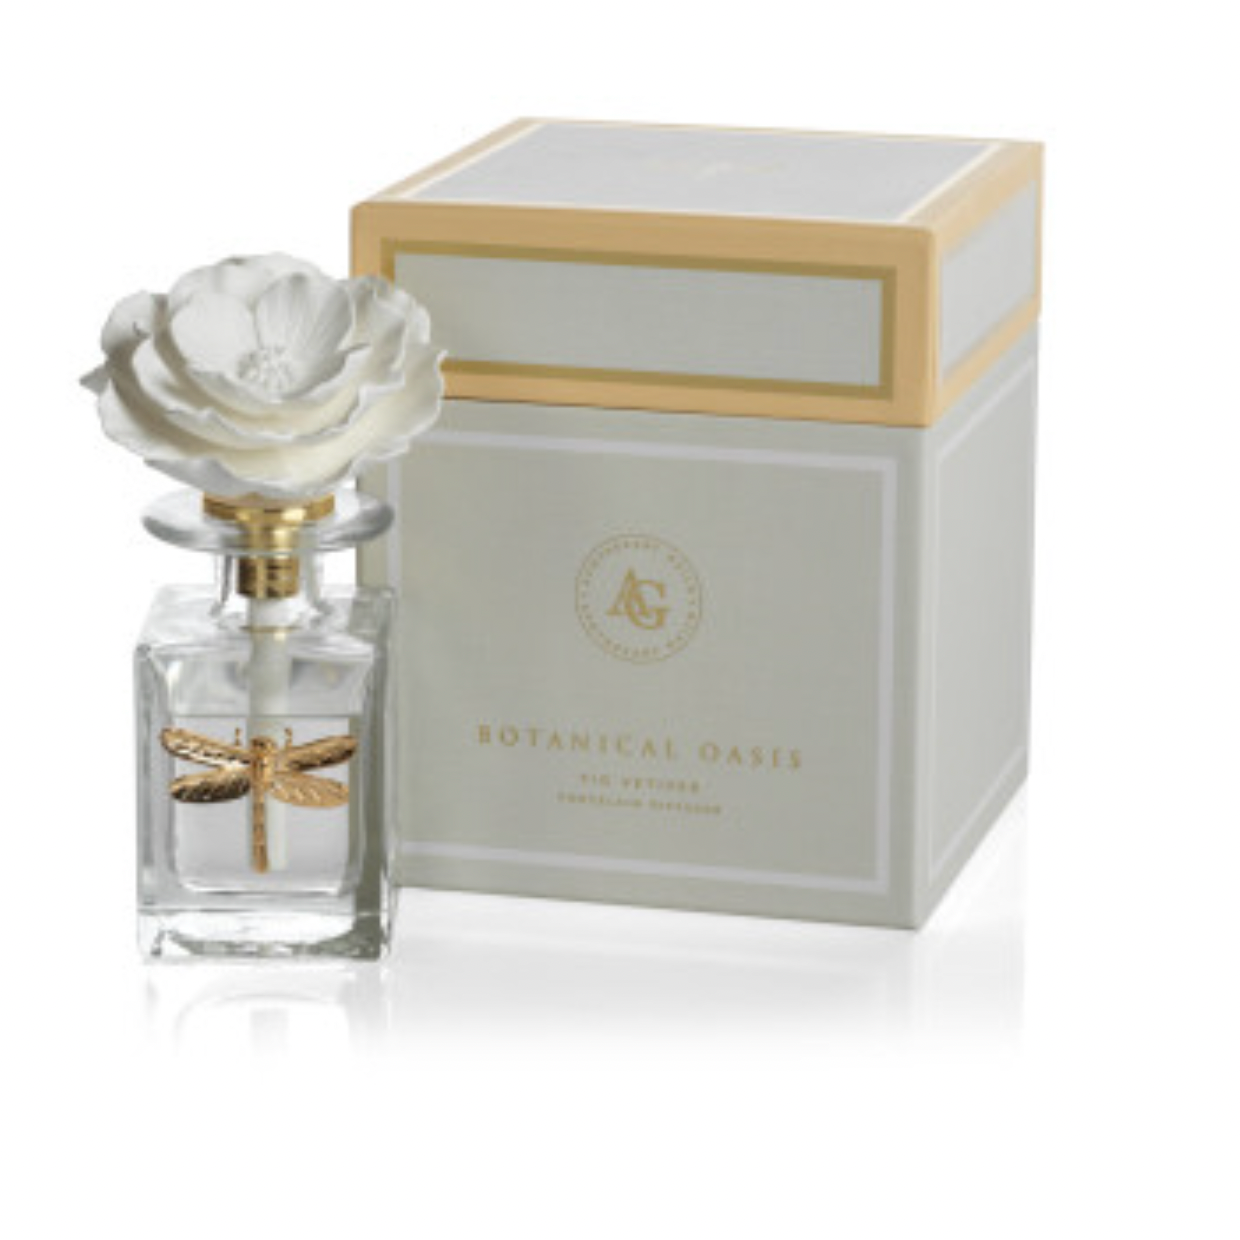 Botanical Oasis Diffuser - Dragonfly